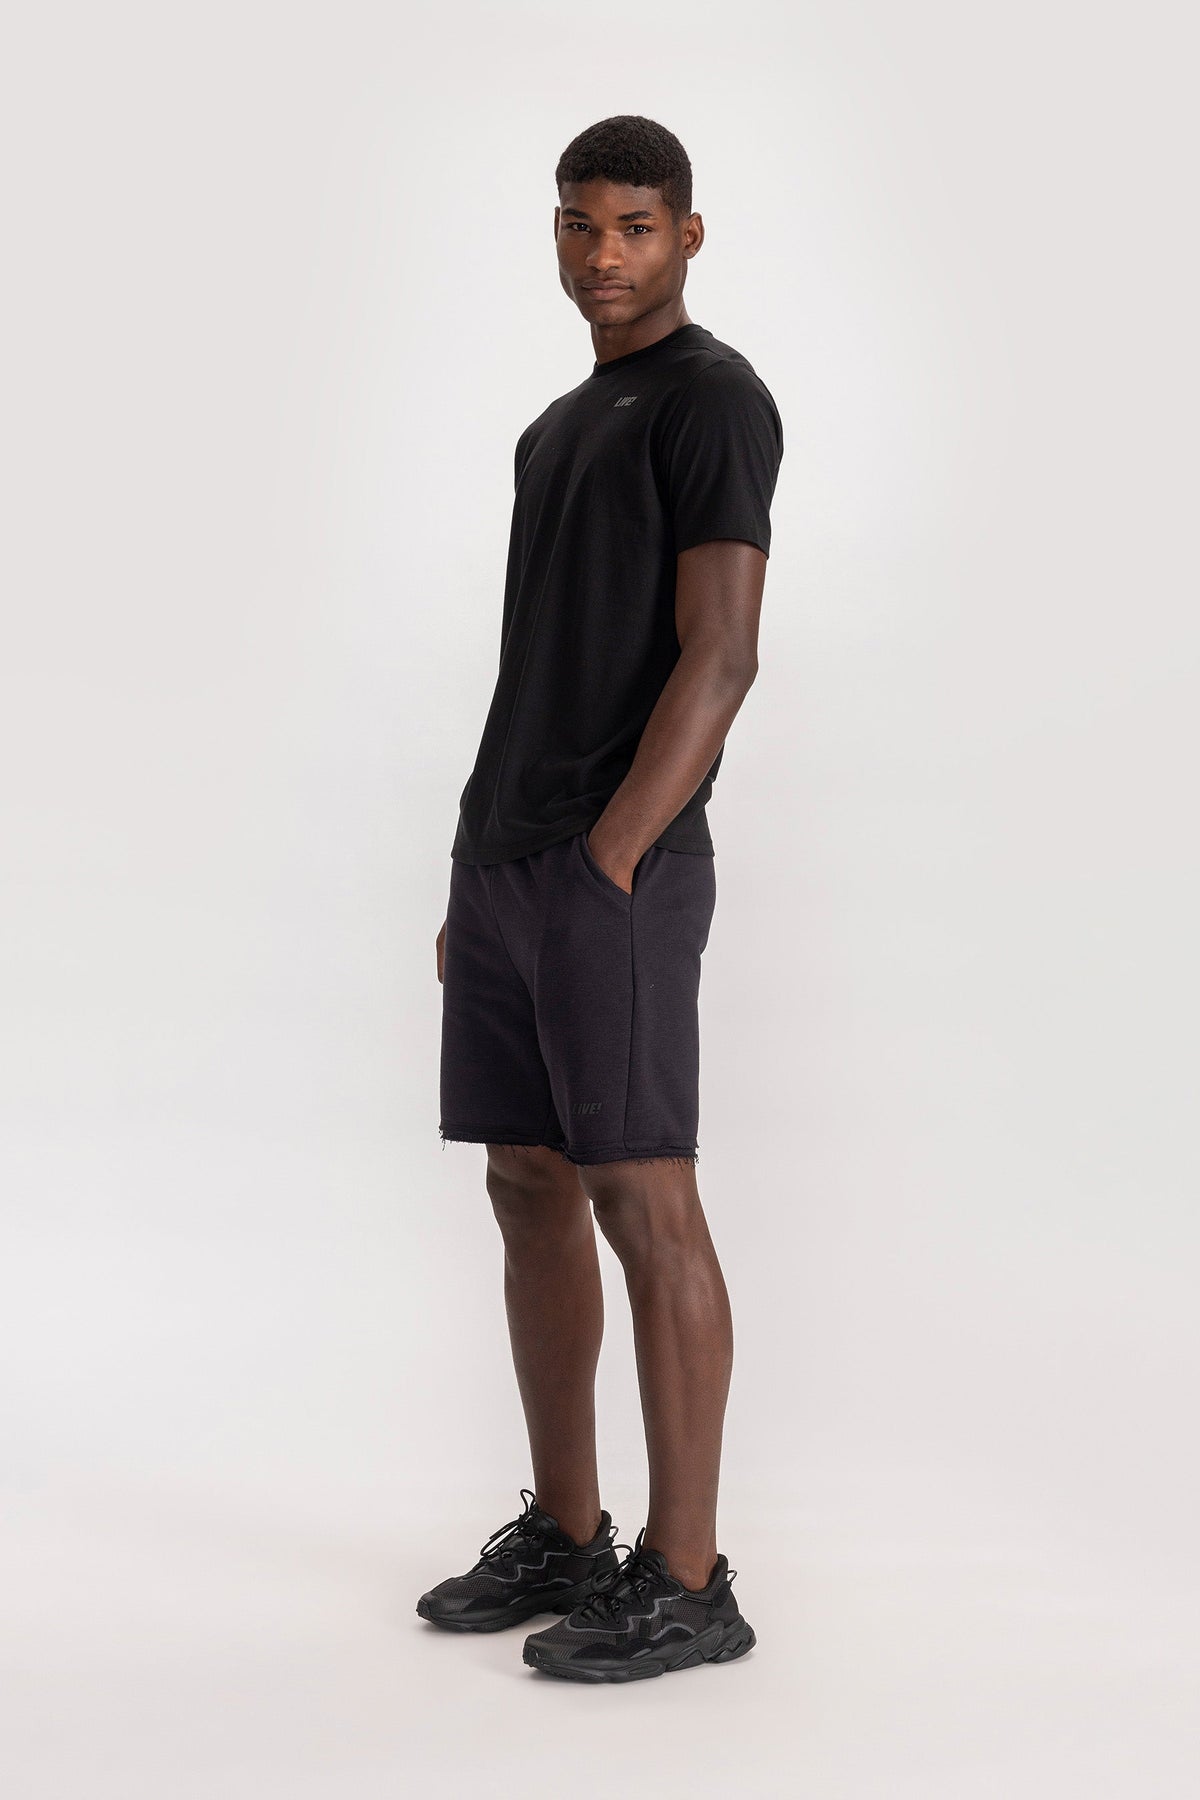 Essential Liveliness Lounge Shorties